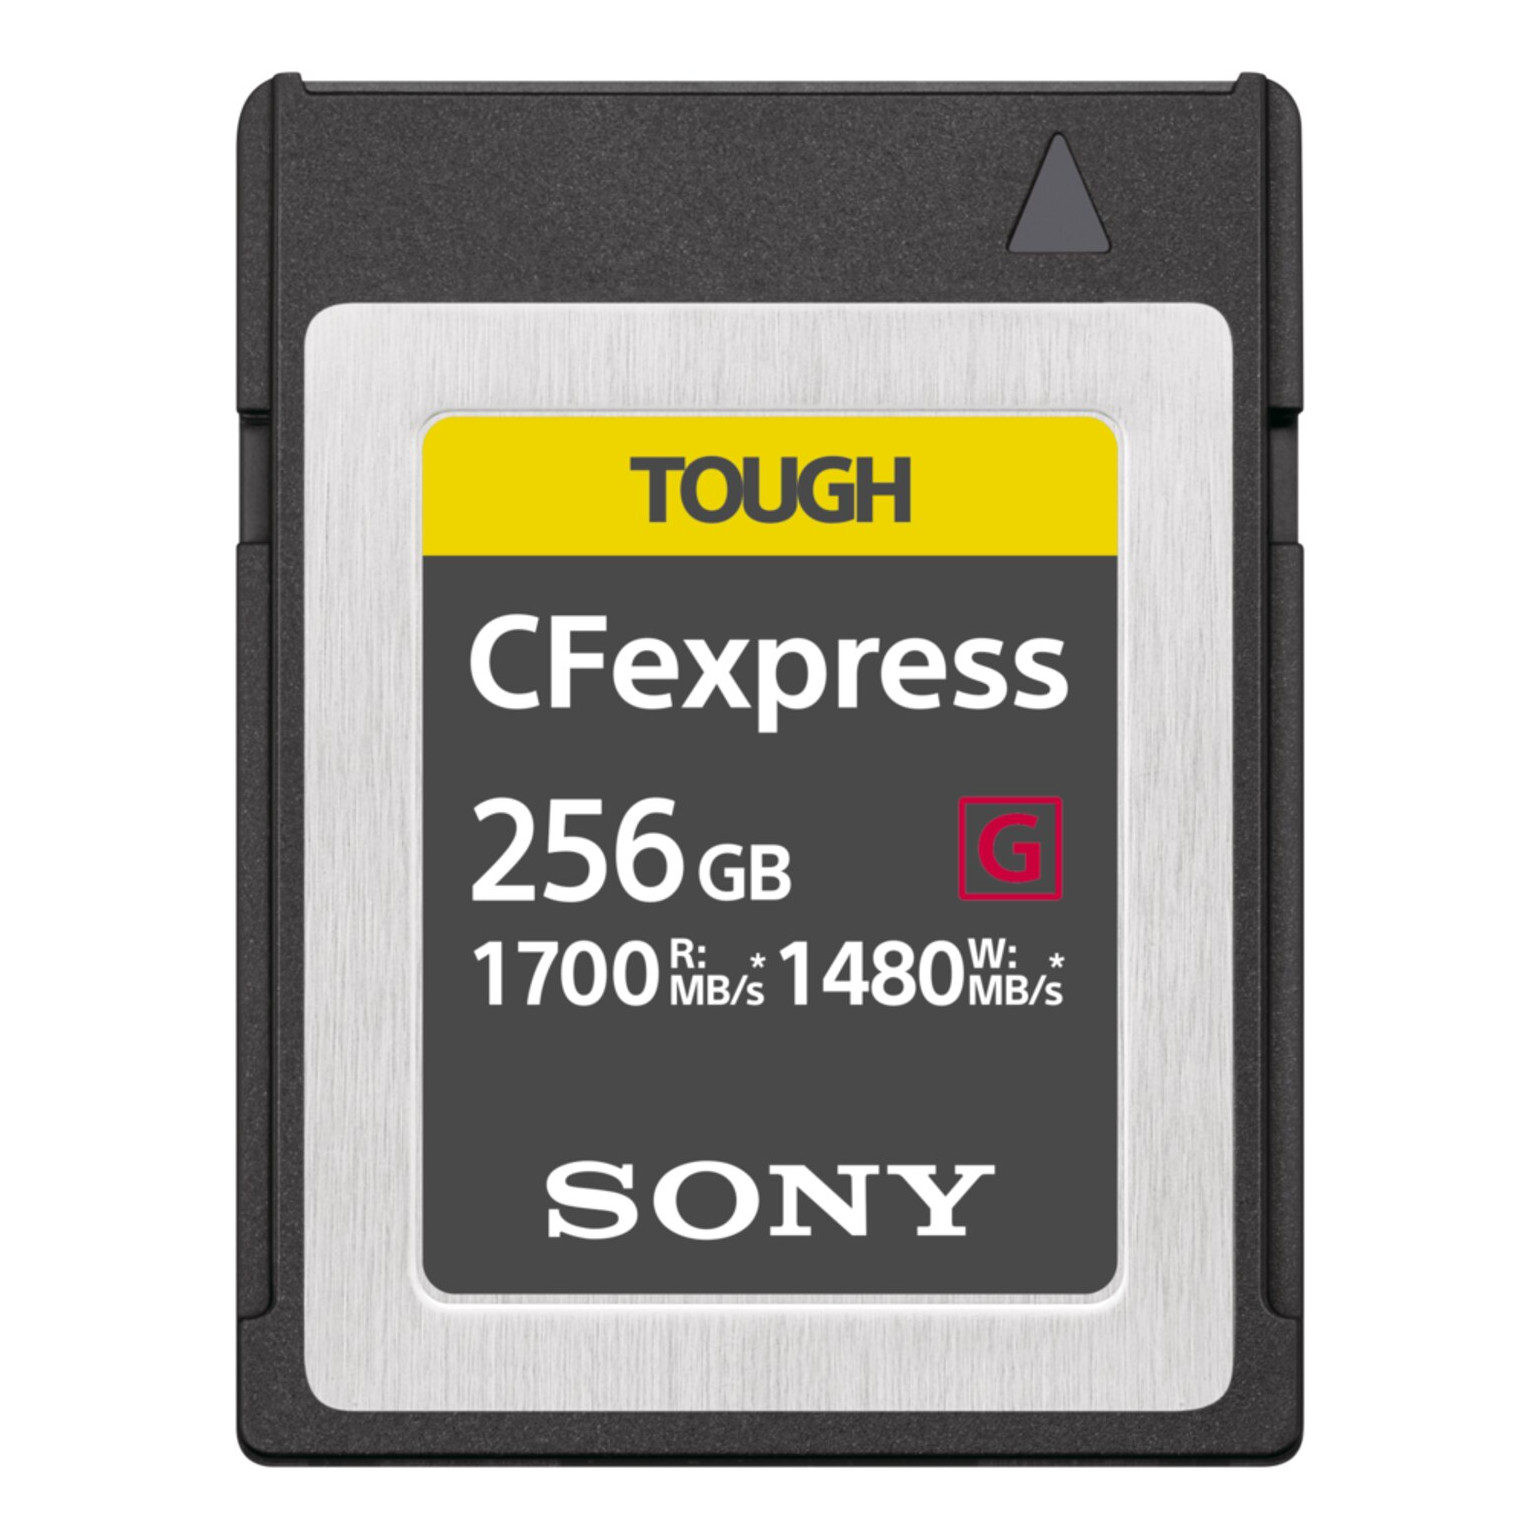 Sony 256GB Tough CFexpress Type B 1700MB/s geheugenkaart